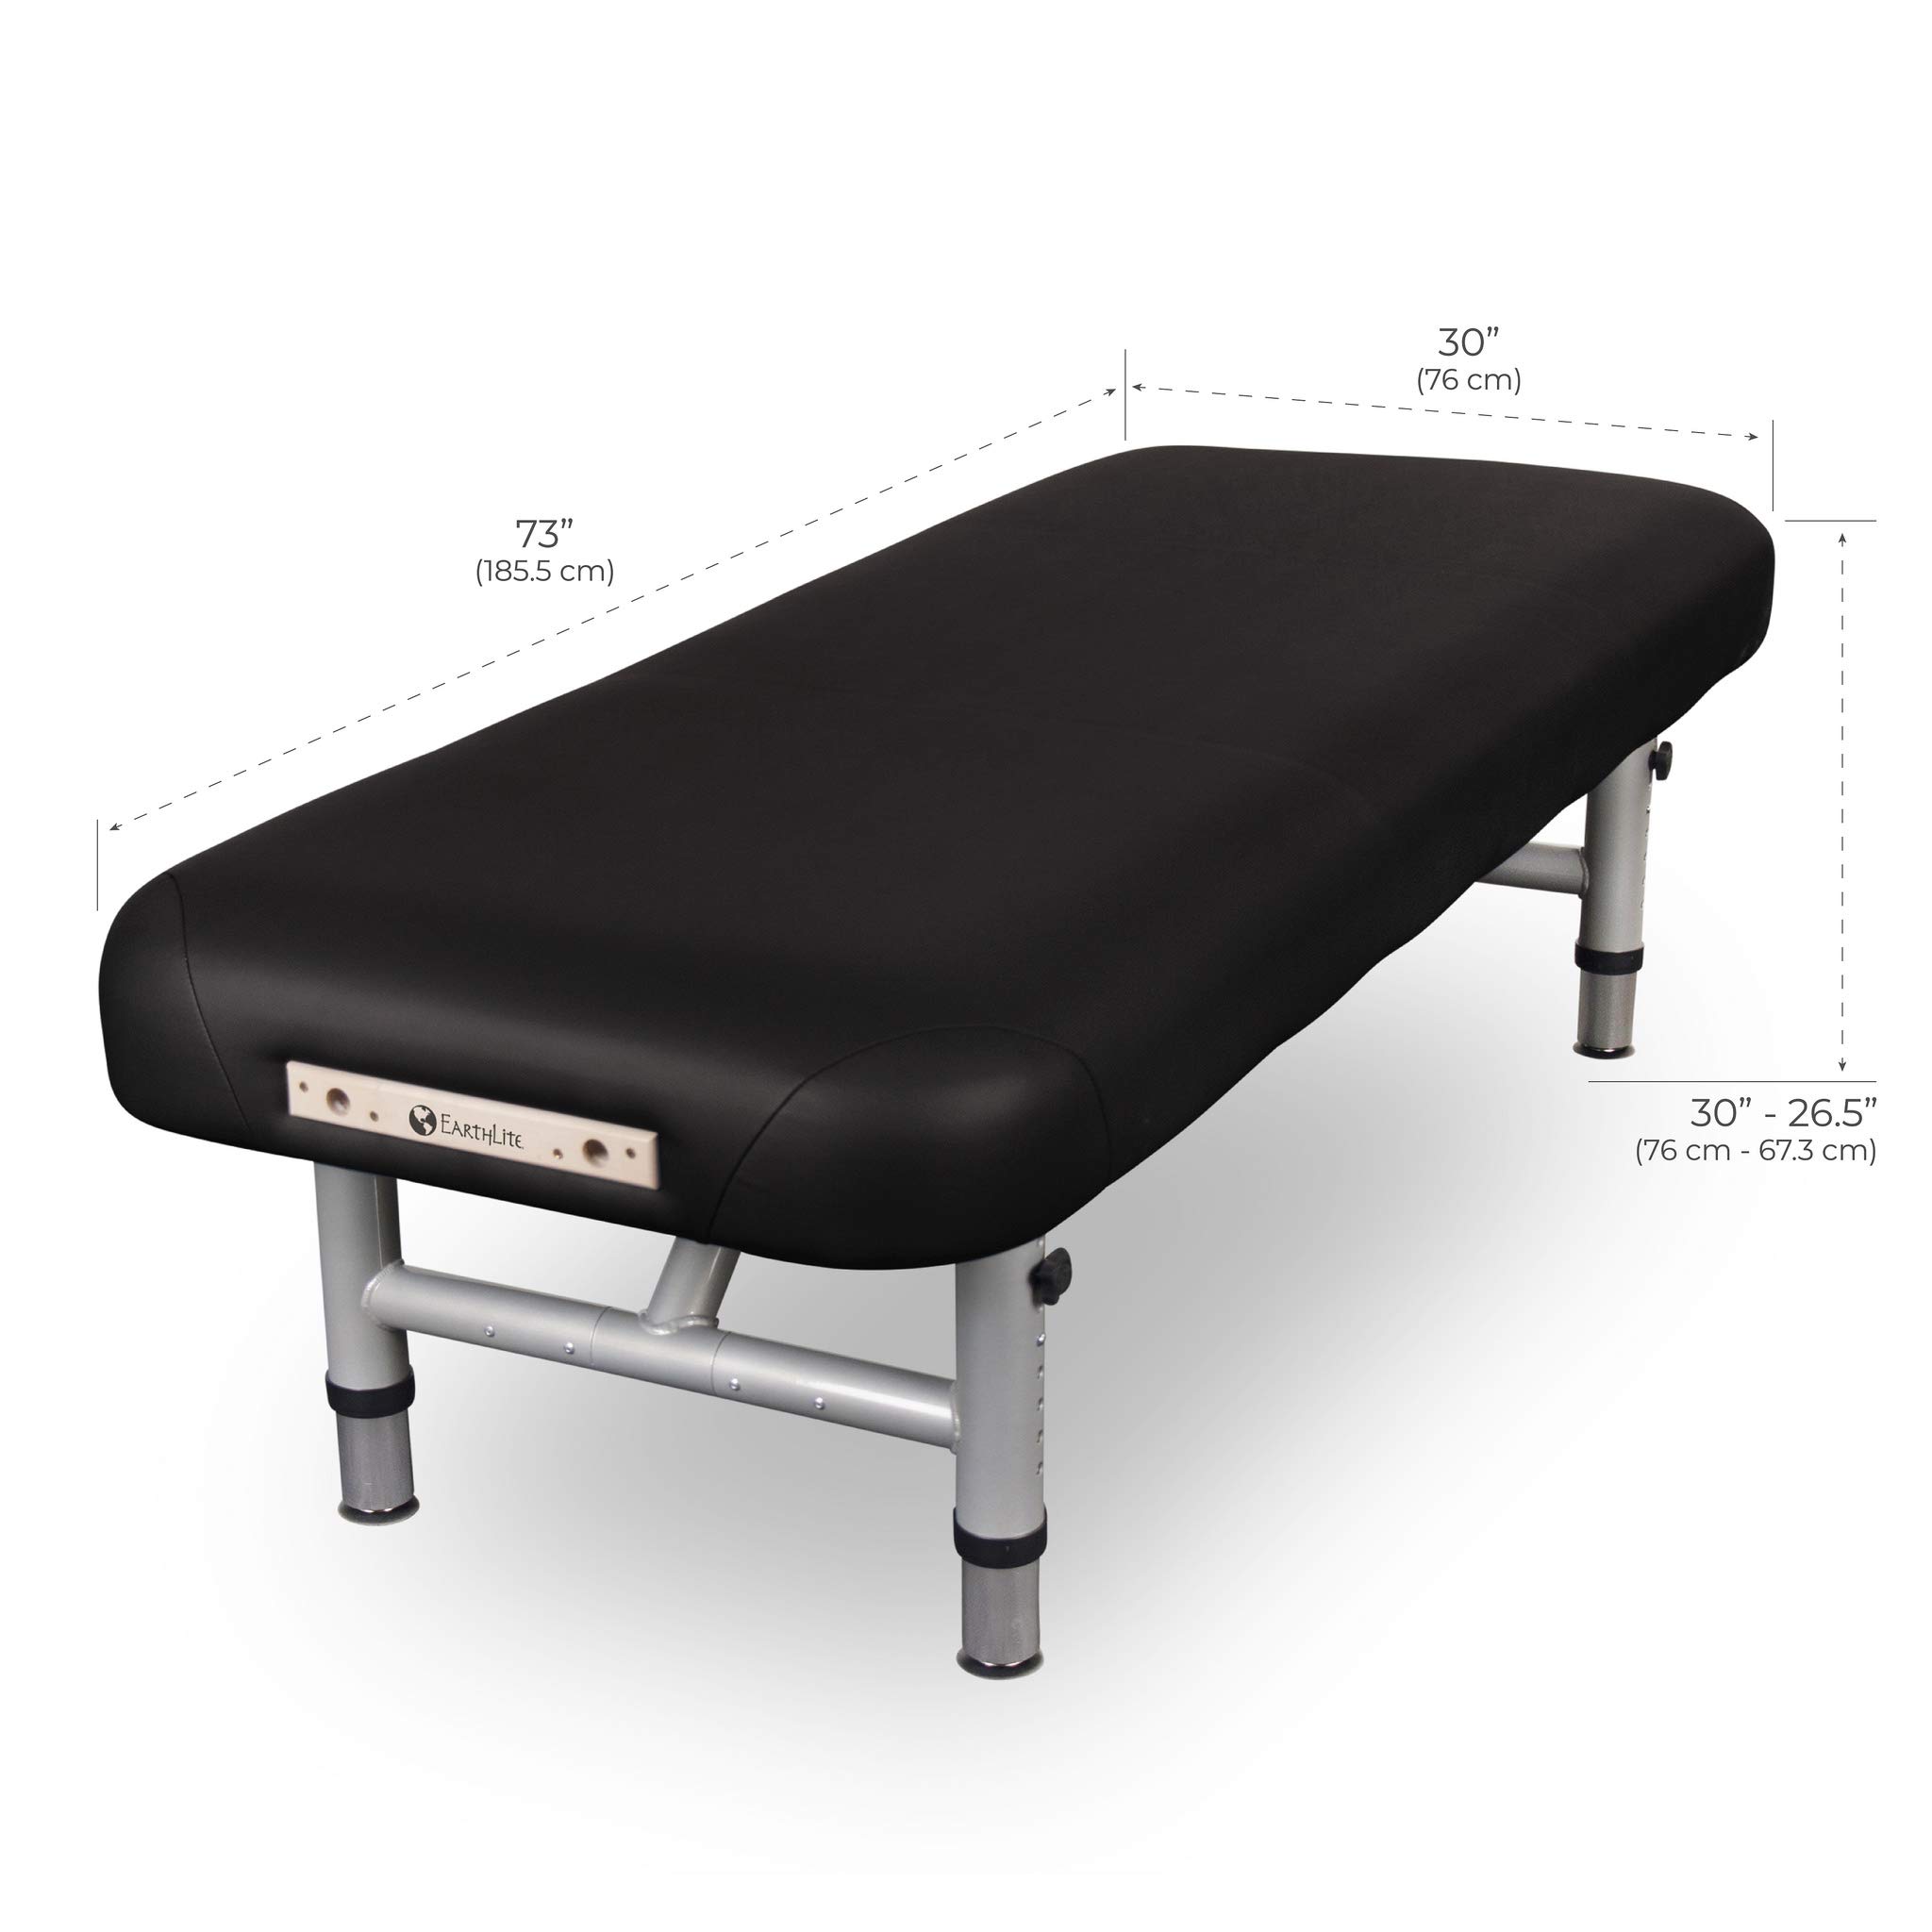 EARTHLITE Physical Therapy Table YOSEMITE 30 – Extra Wide, Adjustable Low Height (20-26.5”) Aluminum Exam & Massage Table, Face Cradle & Face Pillow (30x73”)